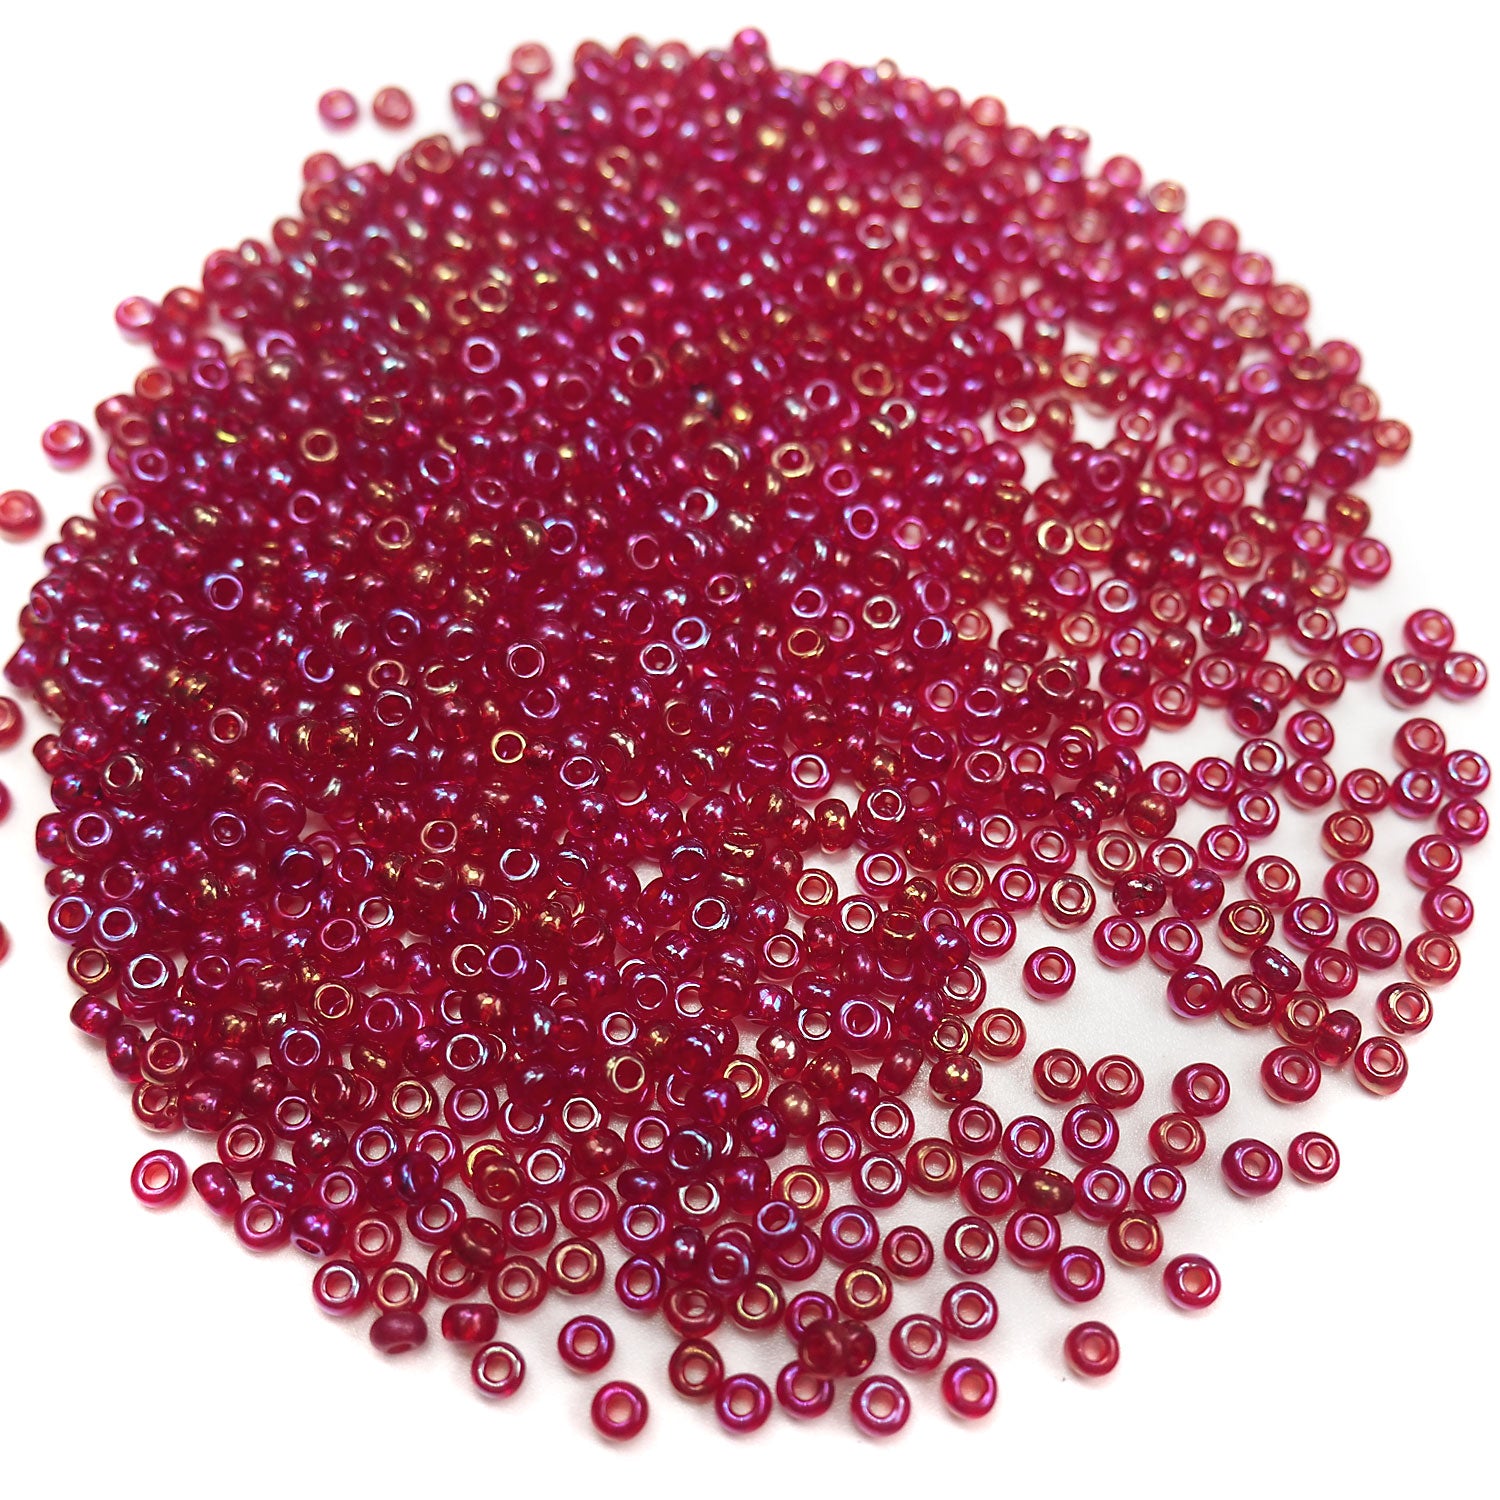 Rocailles size 9/0 (2.6mm) Ruby Red Rainbow, Preciosa Ornela Traditional Czech Glass Seed Beads, 30grams (1 oz), P941